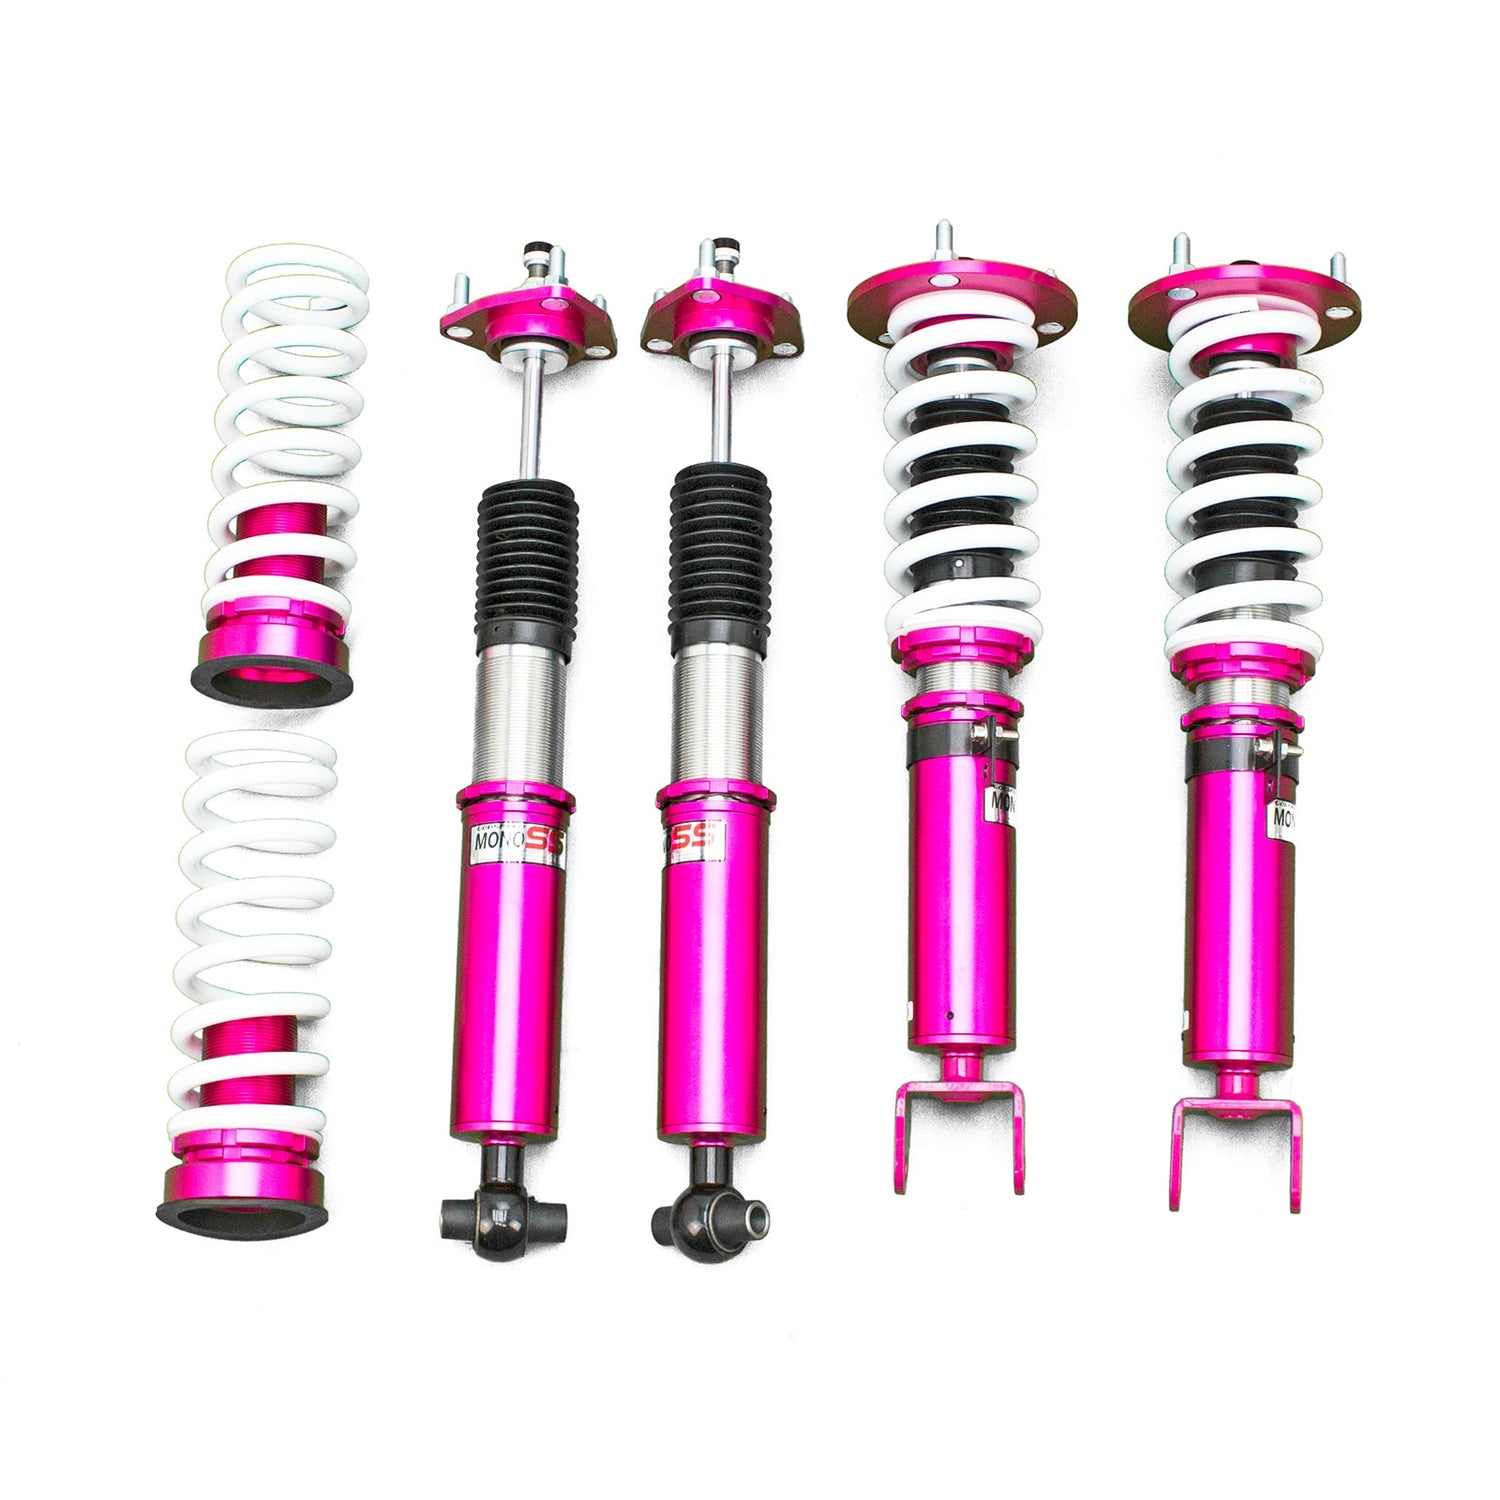 Godspeed MSS0185-B MonoSS Coilover Lowering Kit, Fully Adjustable, Ride Height, Spring Tension And 16 Click Damping, Lexus IS(XE30) 2014-18